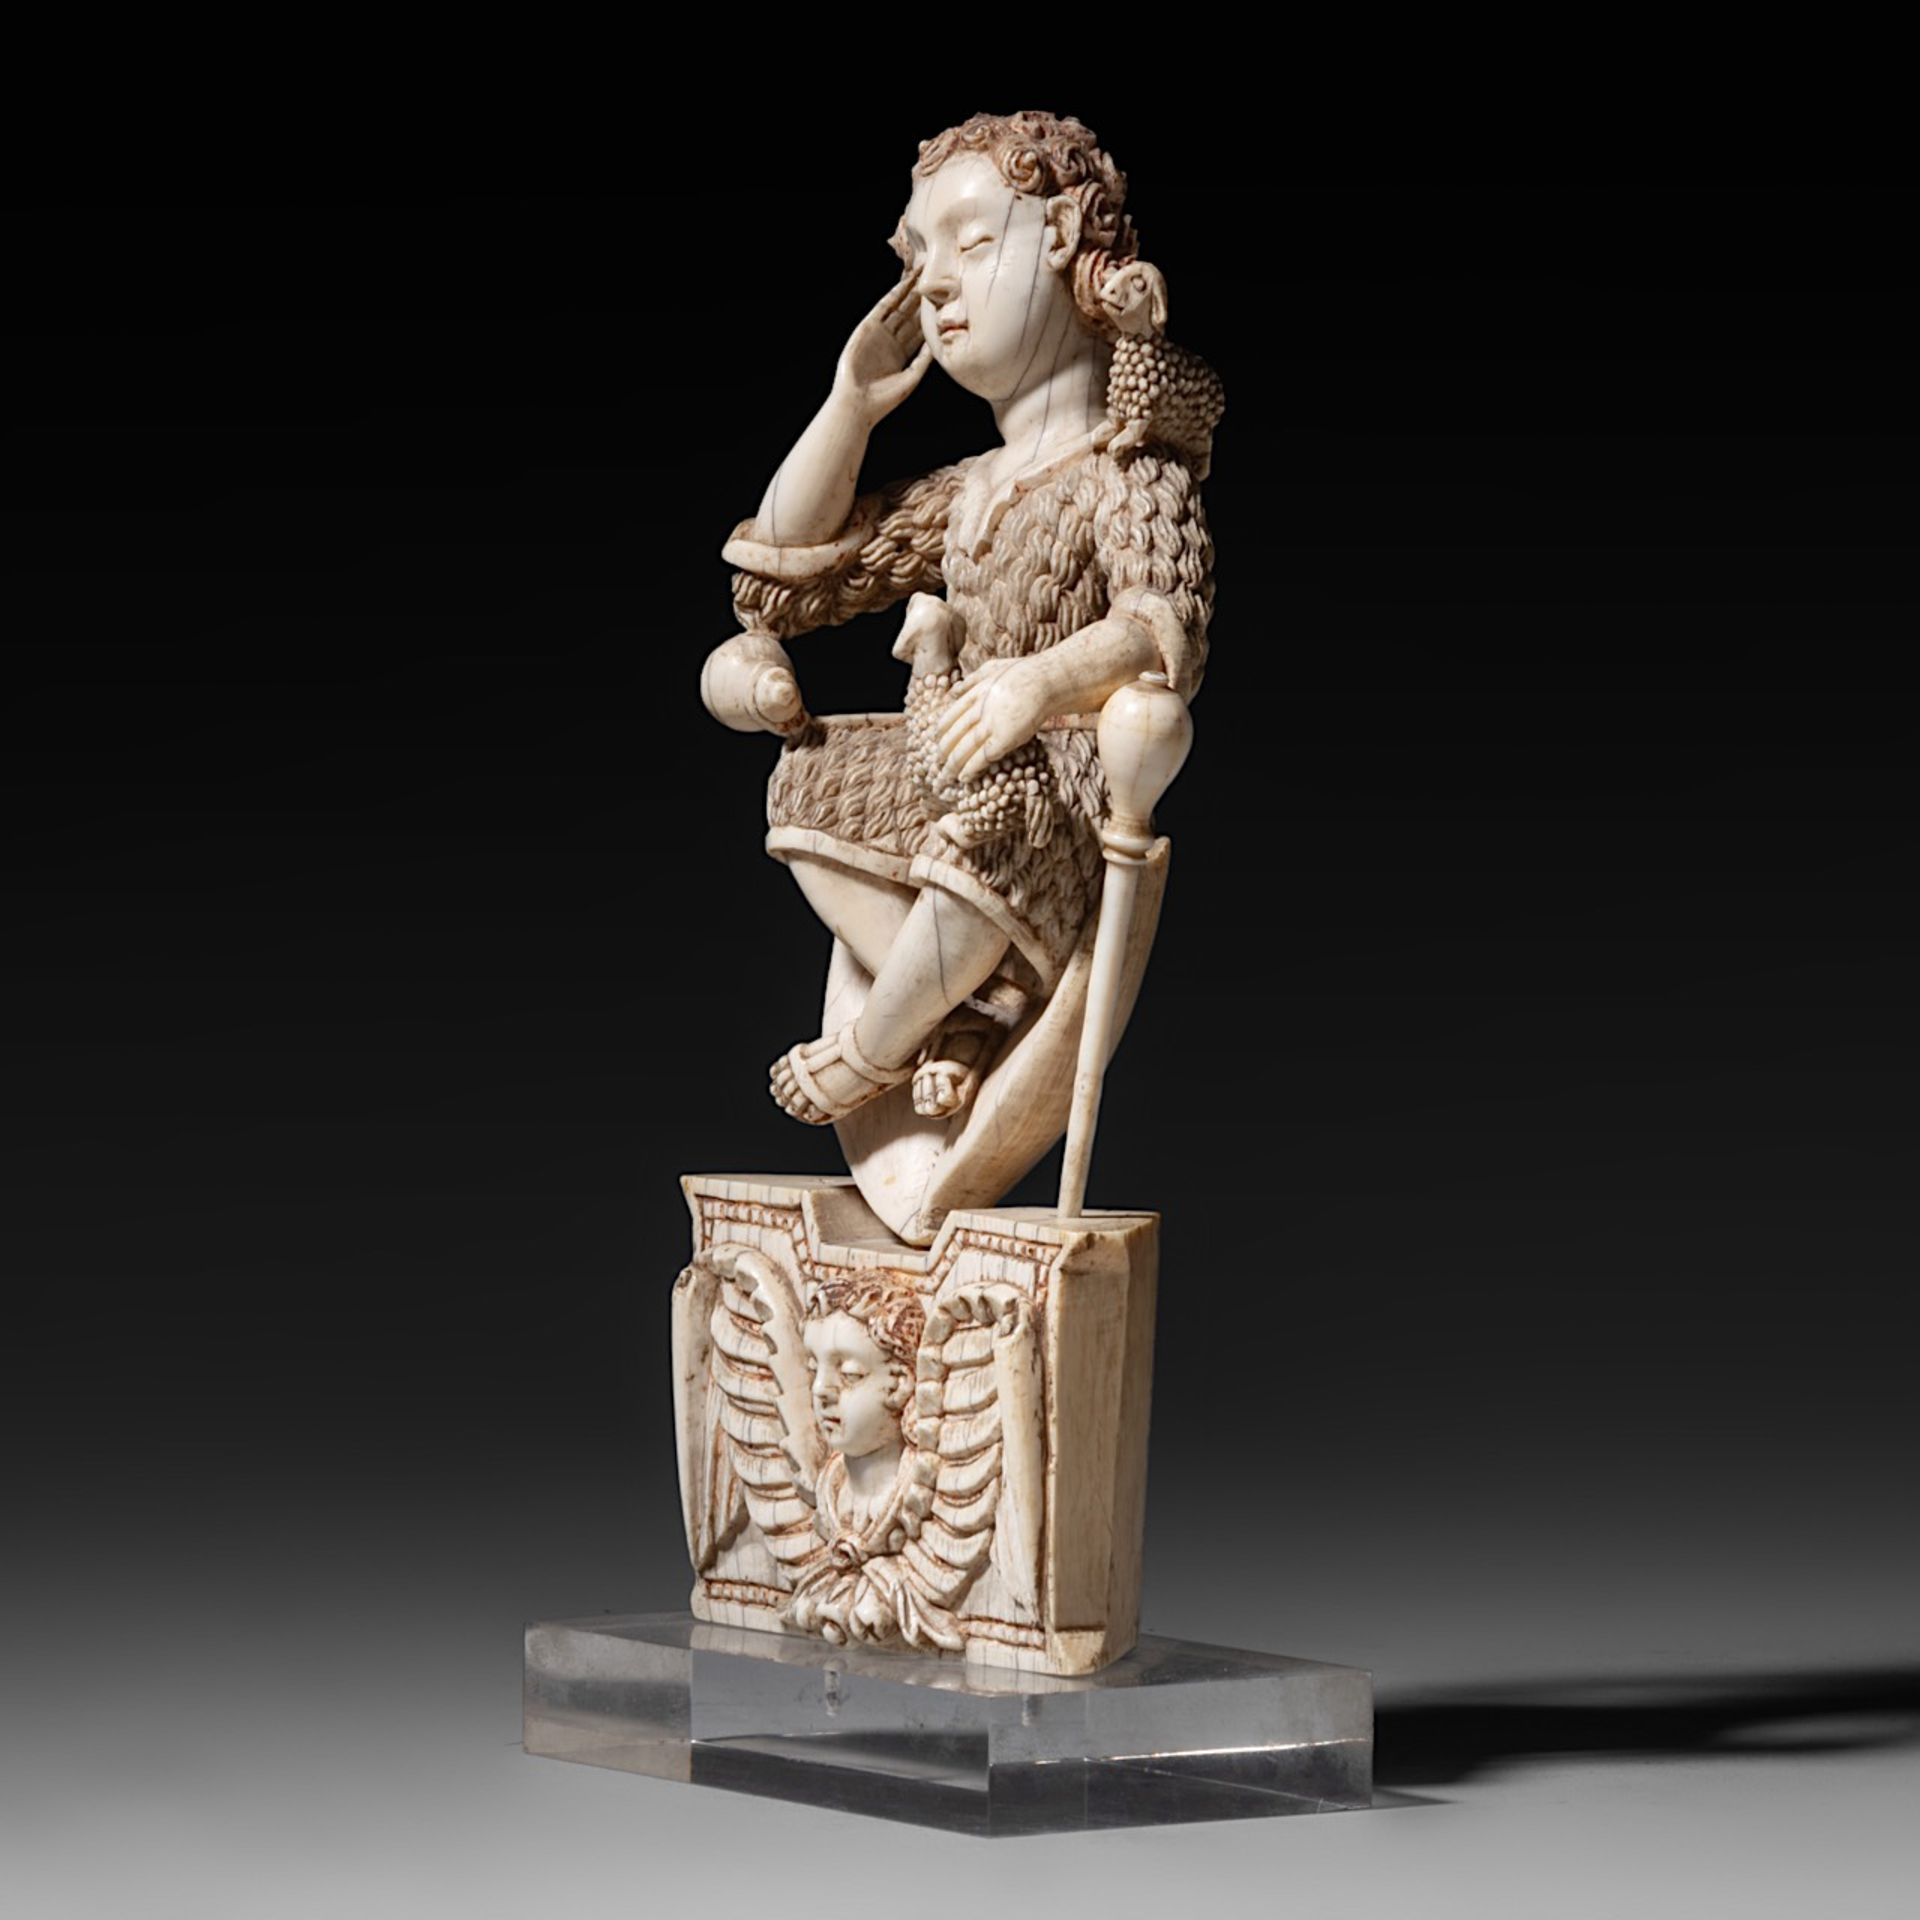 A large 17th-18thC Goa ivory carving of Christ represented as the Good Shepherd, ivory H 22,5 cm - t - Image 3 of 8